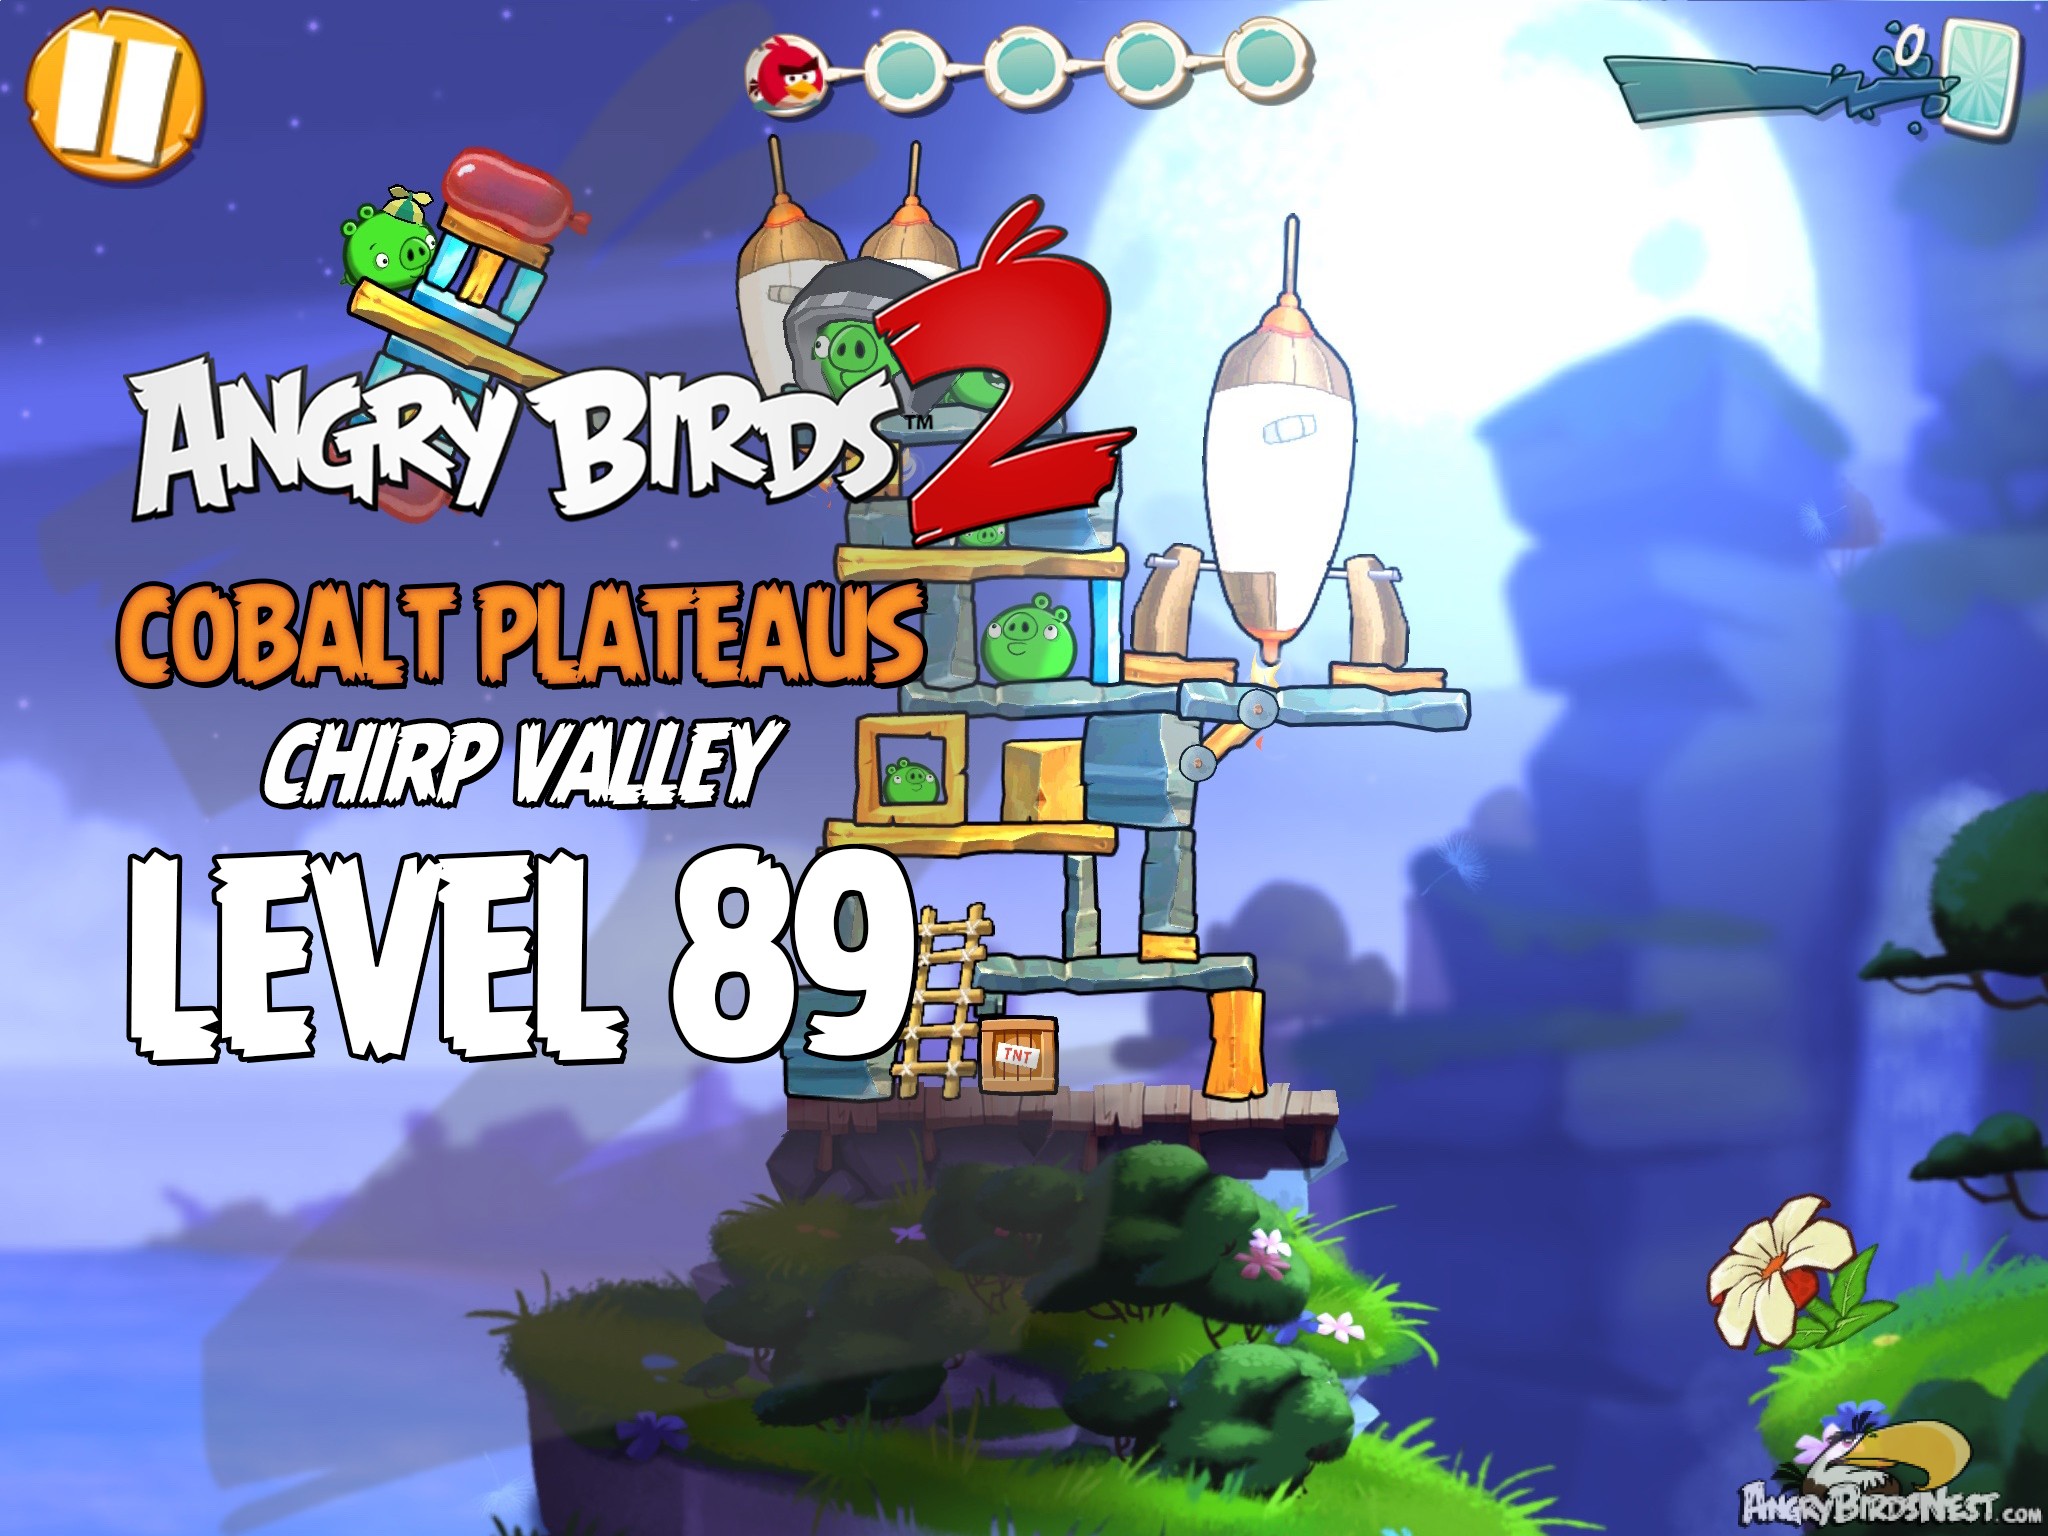 Angry Birds 2 Cobalt Plateaus Chirp Valley Level 89